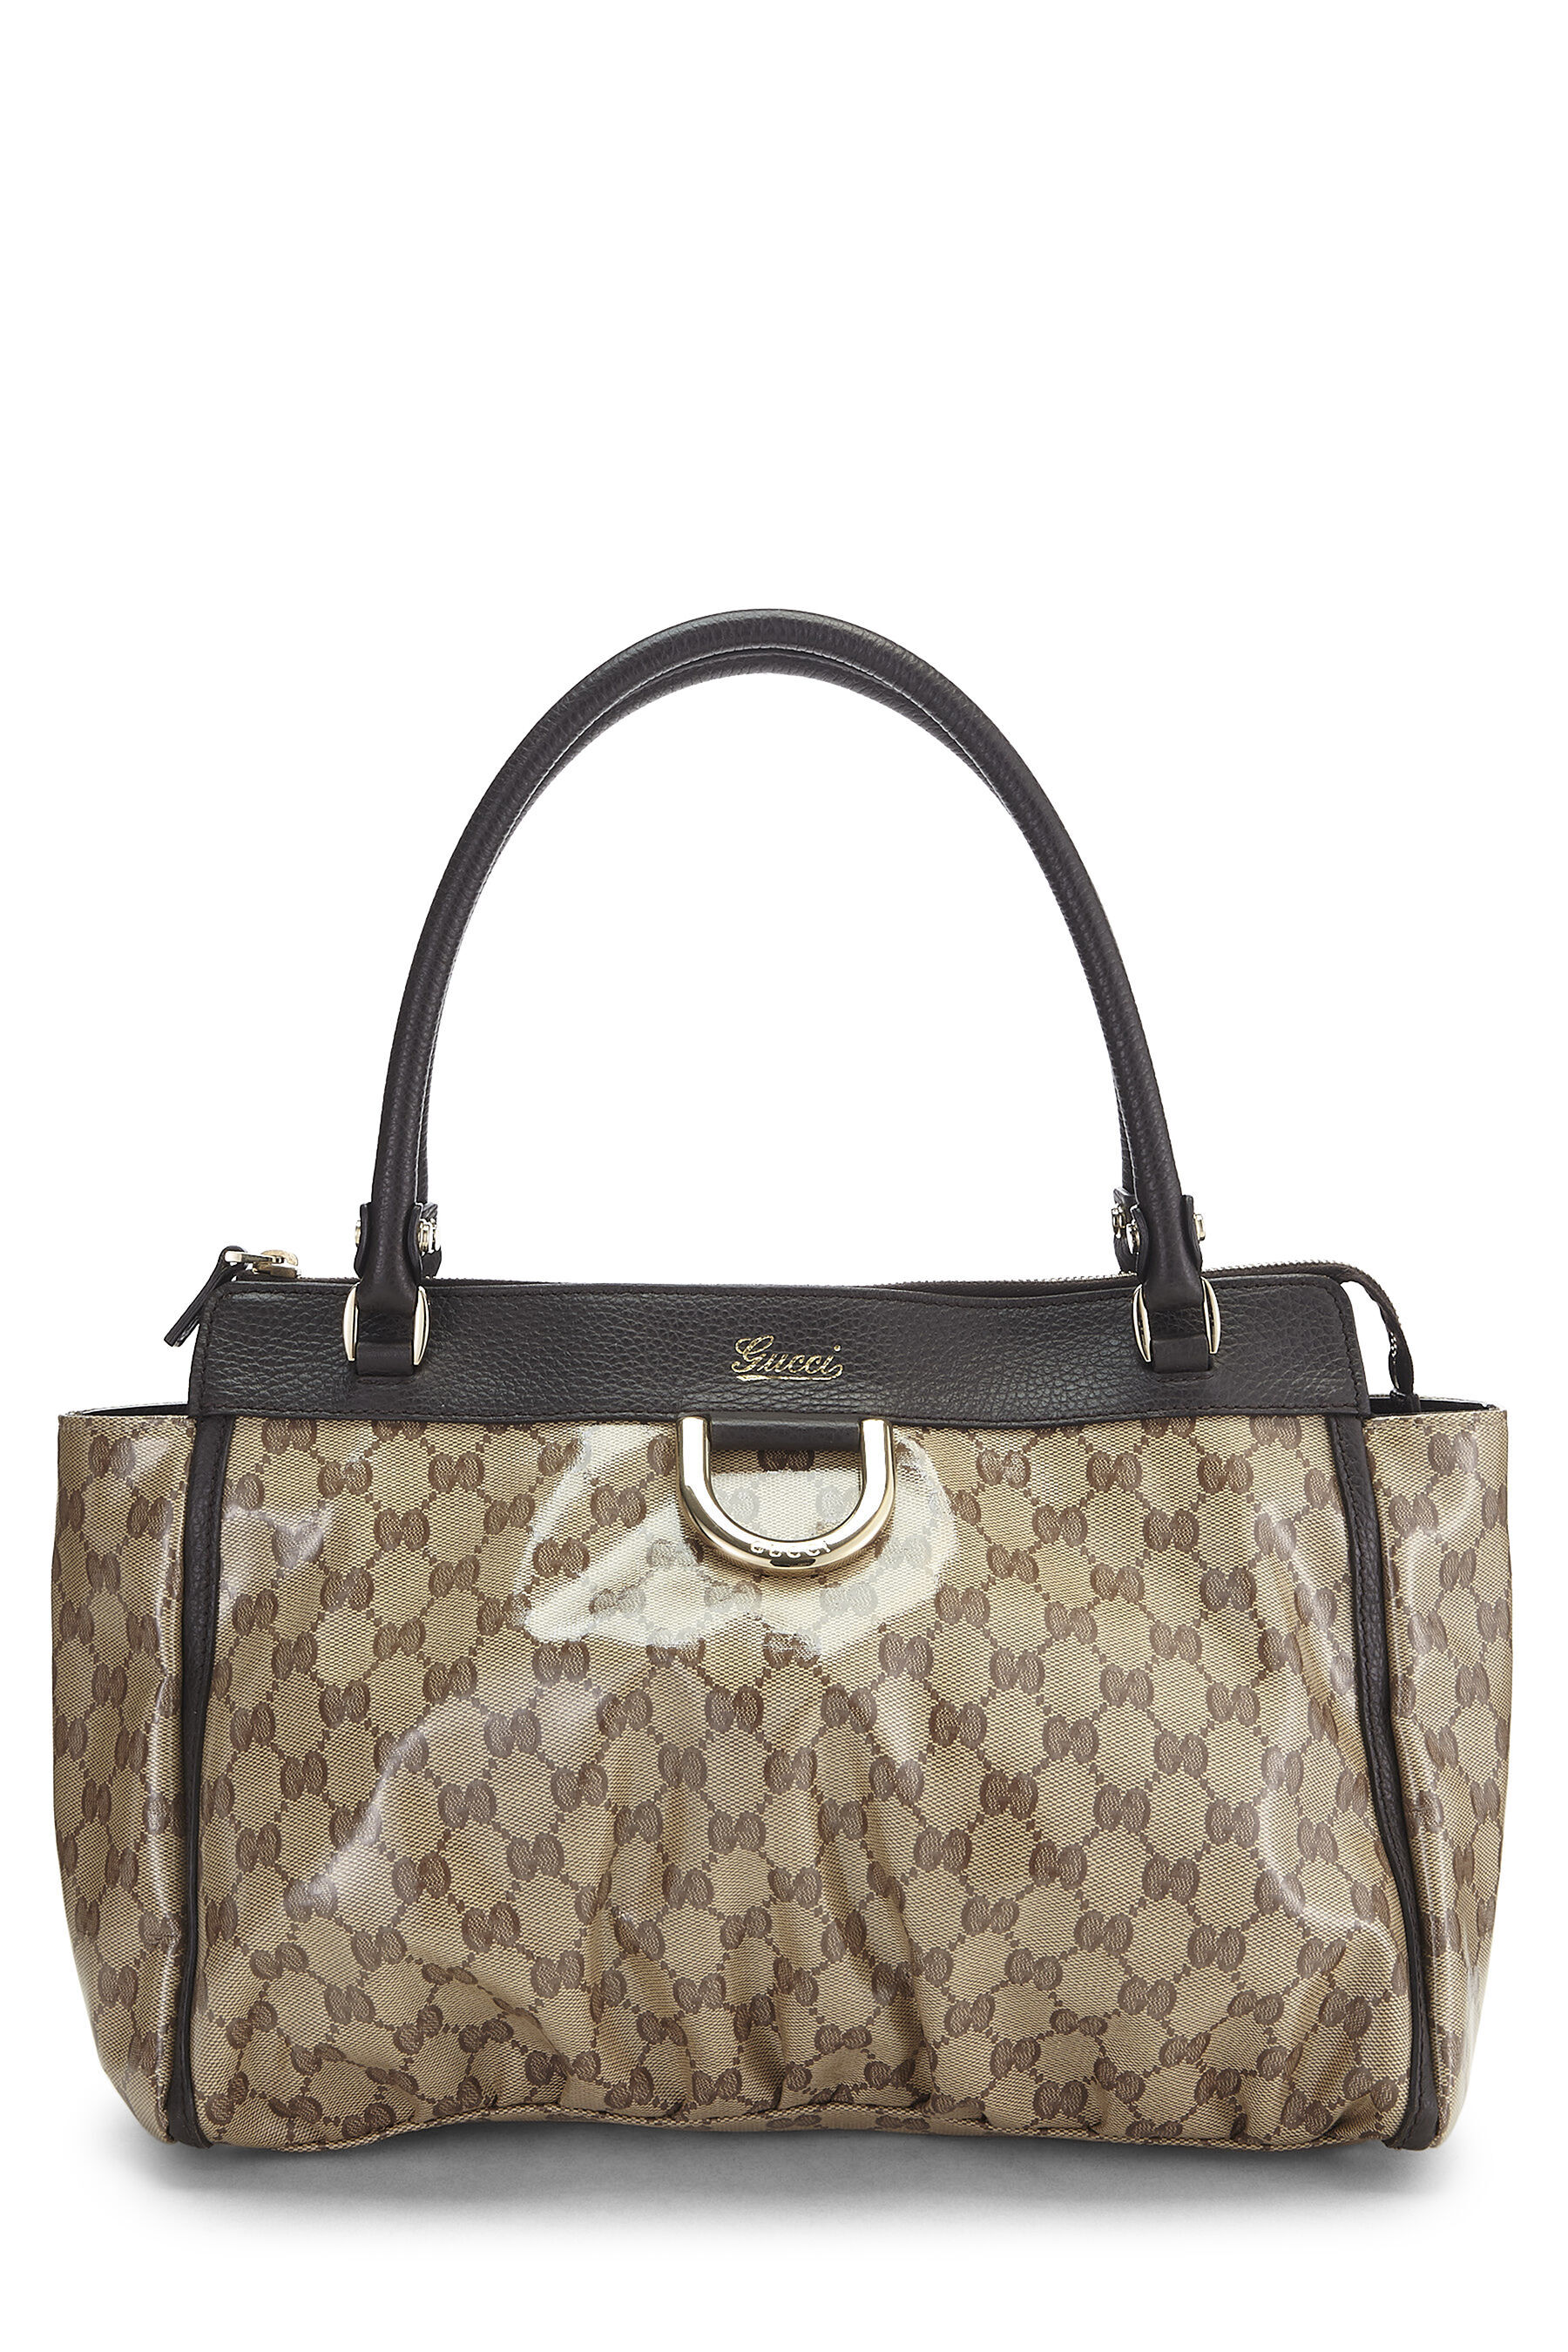 Gucci Abbey GG Canvas D-Ring Shoulder Bag on SALE | Saks OFF 5TH